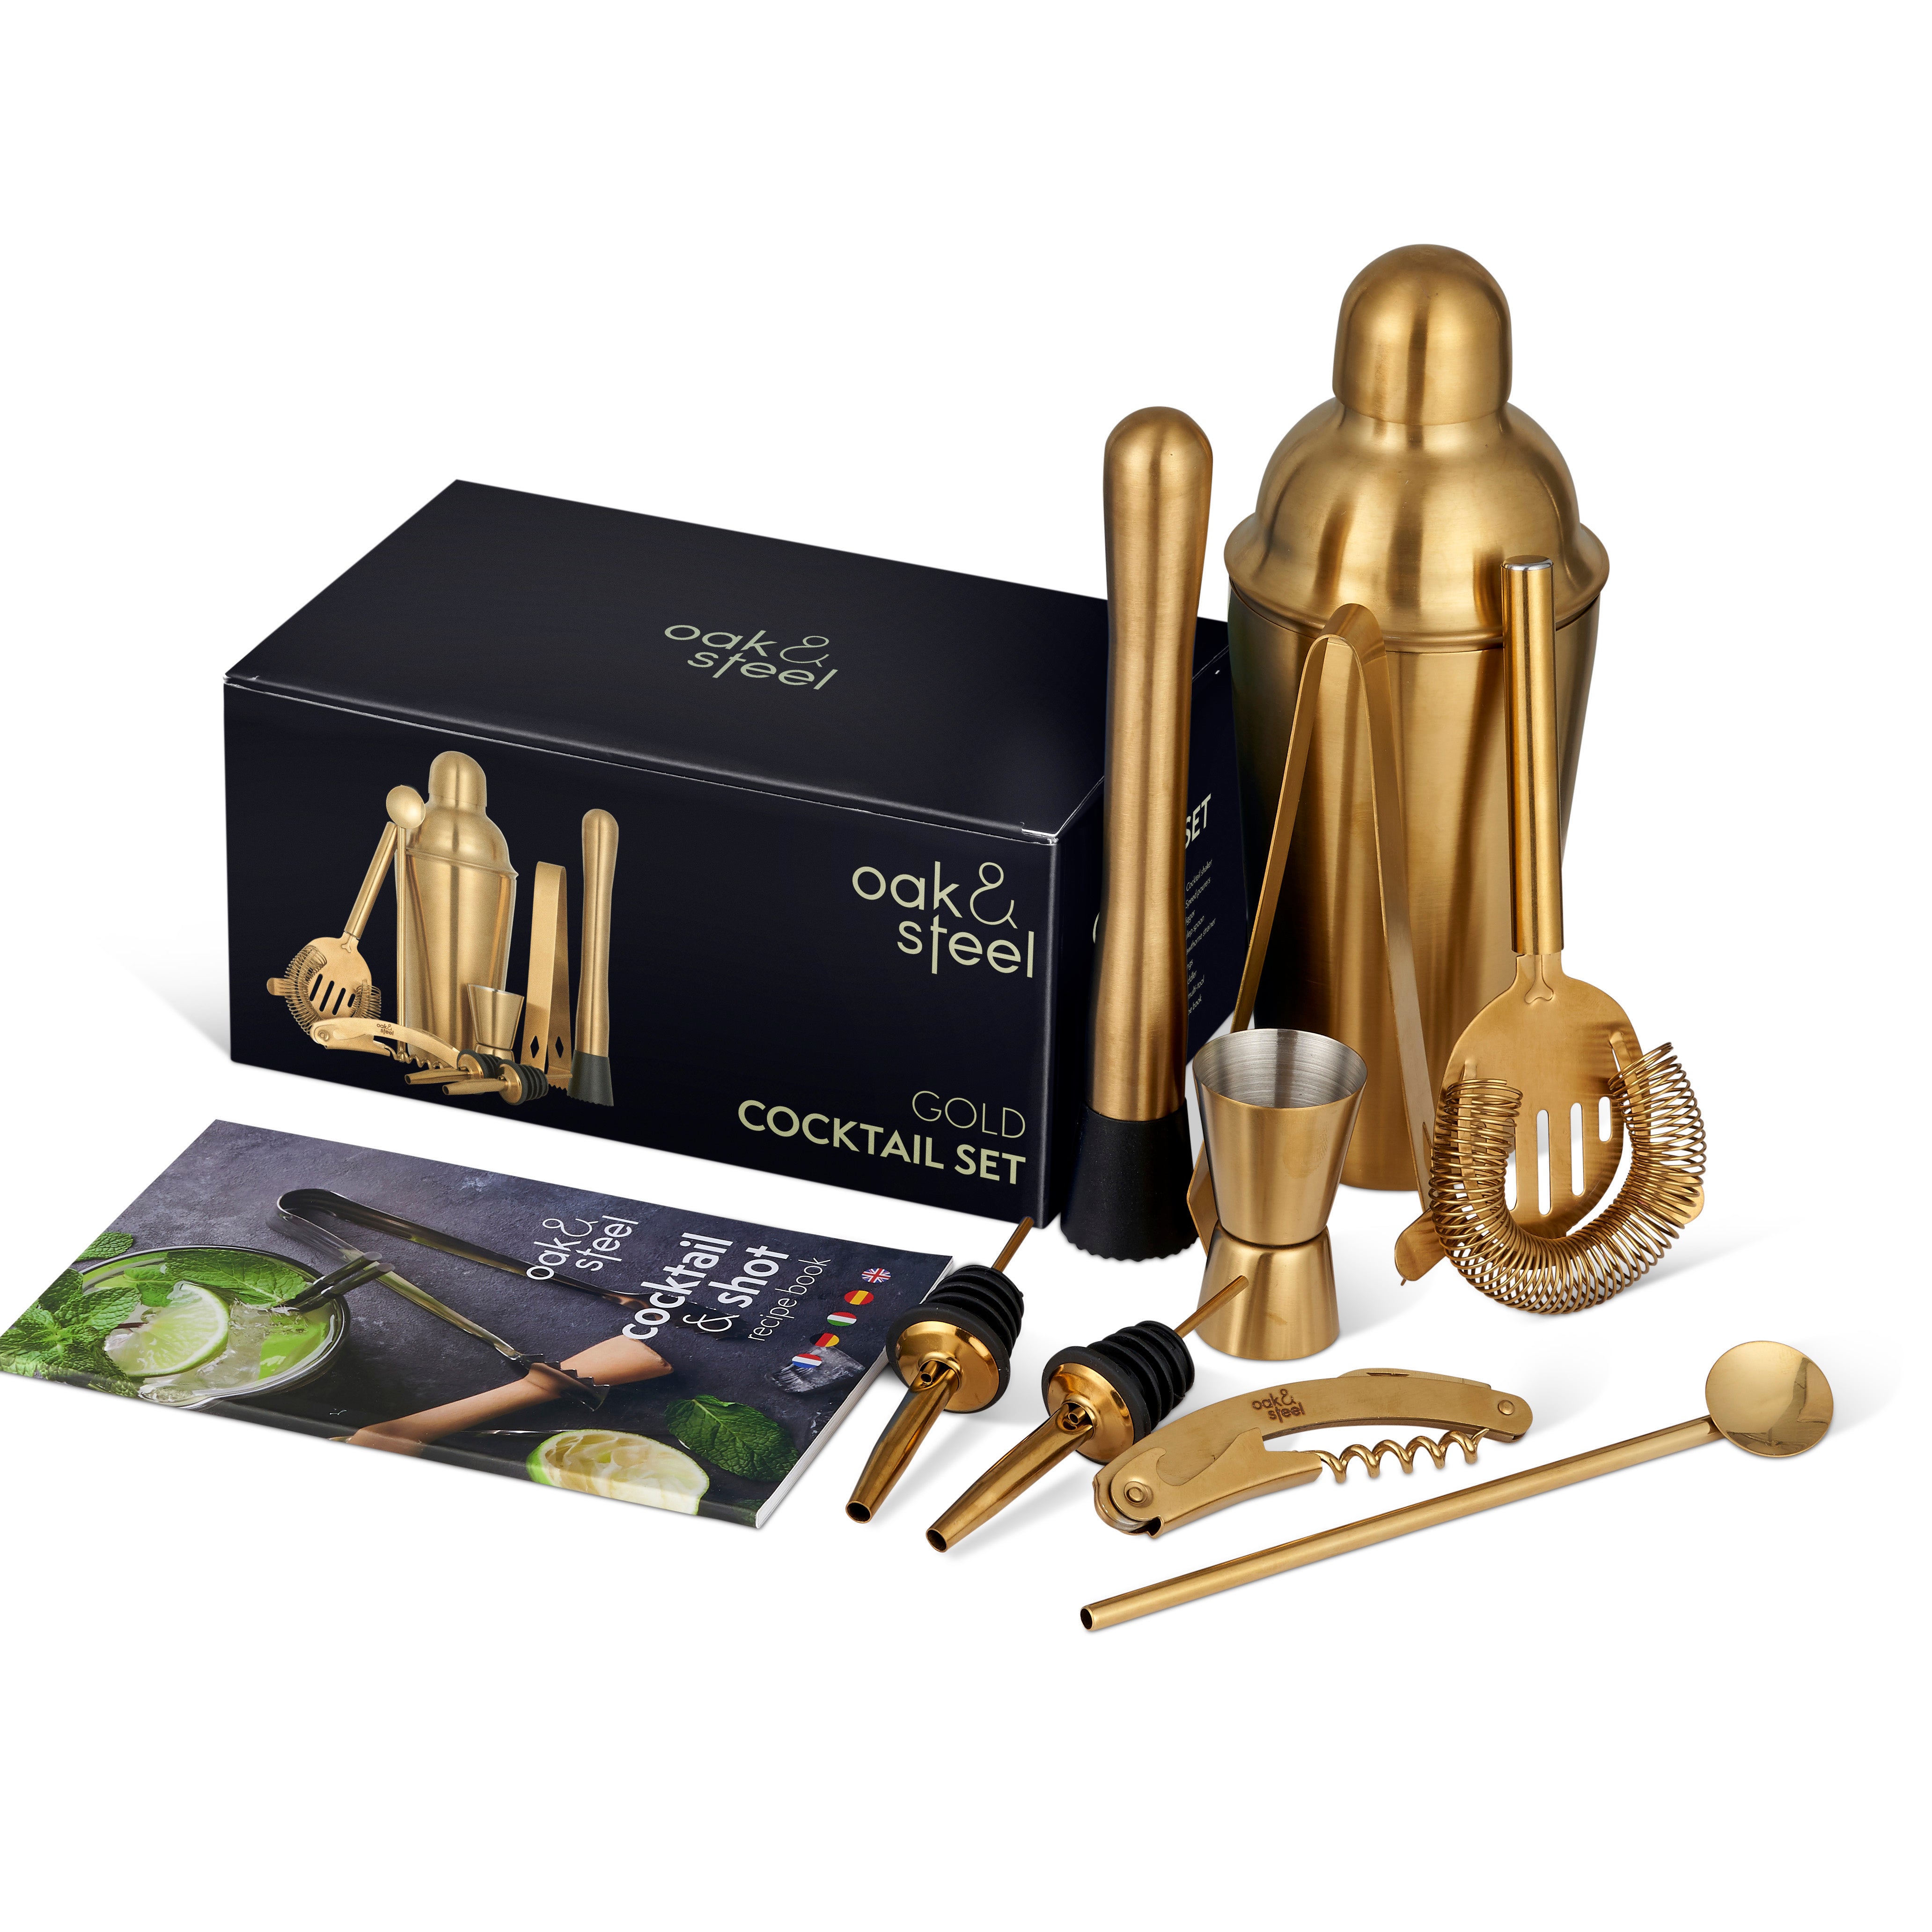 10pcs Stainless Steel Gold Cocktail Set